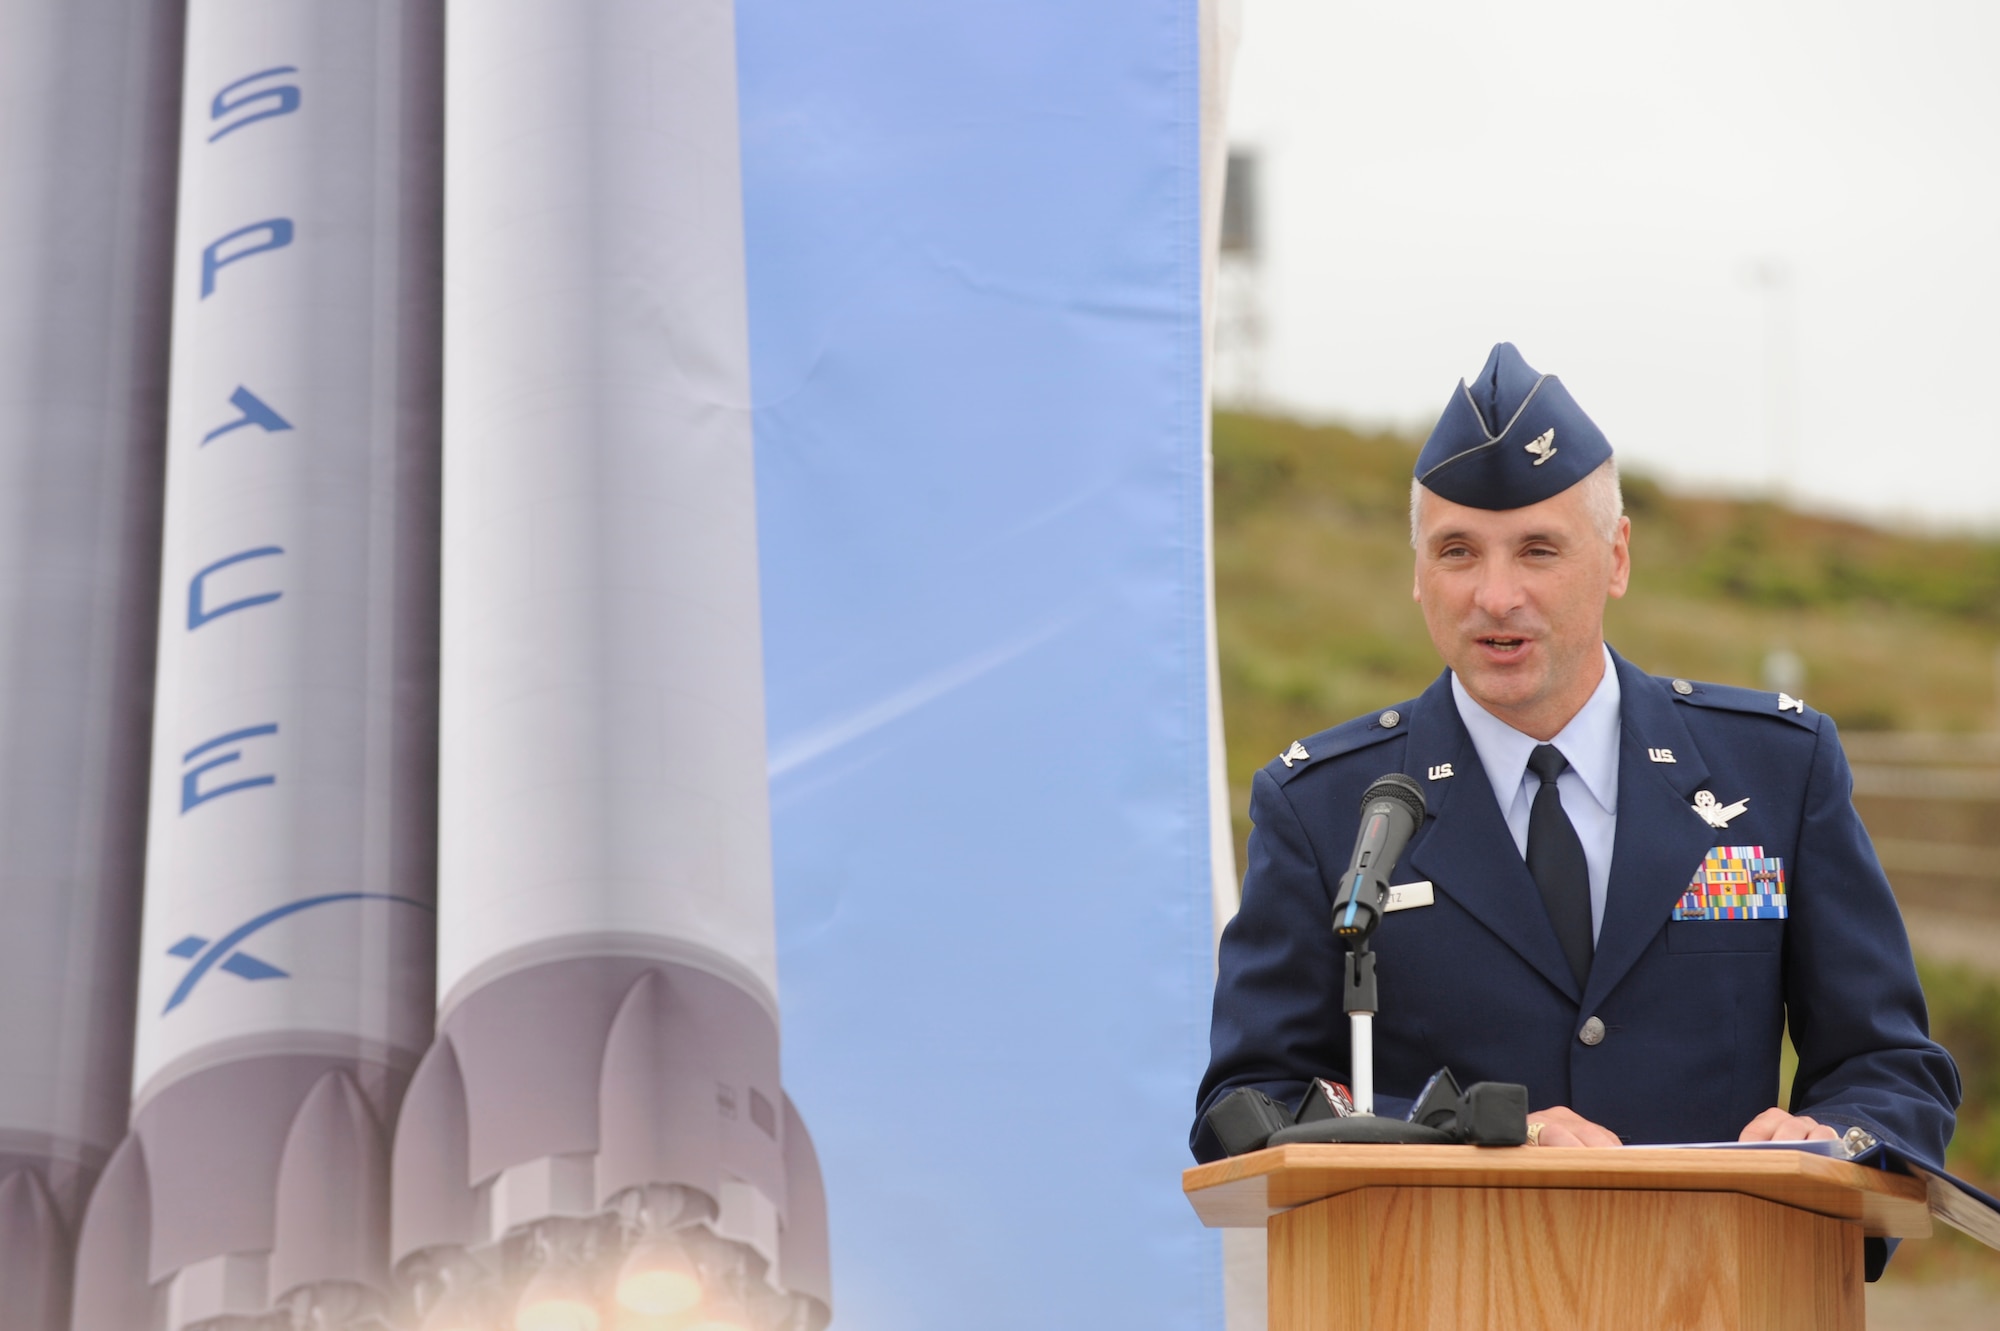 VANDENBERG AIR FORCE BASE, Calif. -- Col. Richard Boltz, the 30th Space Wing commander, speaks during the ground breaking ceremony at Space Launch Complex 4 East here Wednesday, July 14, 2011.  SpaceX has plans to launch their Falcon Heavy from Vandenberg in 2013.  (U.S. Air Force photo/Staff Sgt. Andrew Satran) 
 